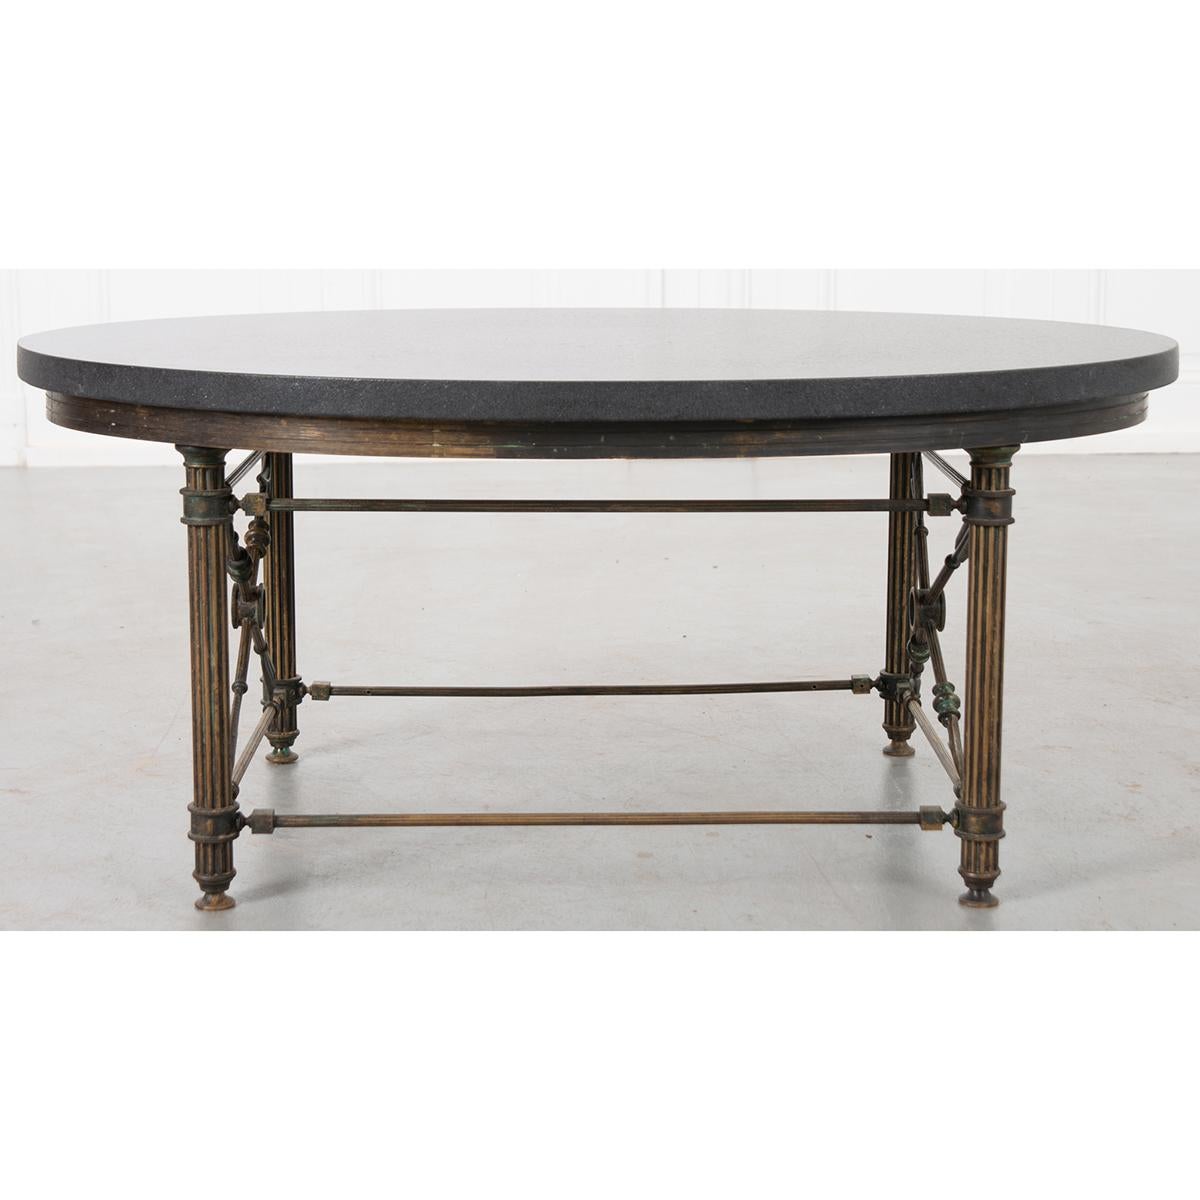 This is a fantastic French vintage brass coffee table base. Made of brass, it has crossed arrows on both ends. It is topped with a new black marble top with a leather finish. Would be very nice in a small space.